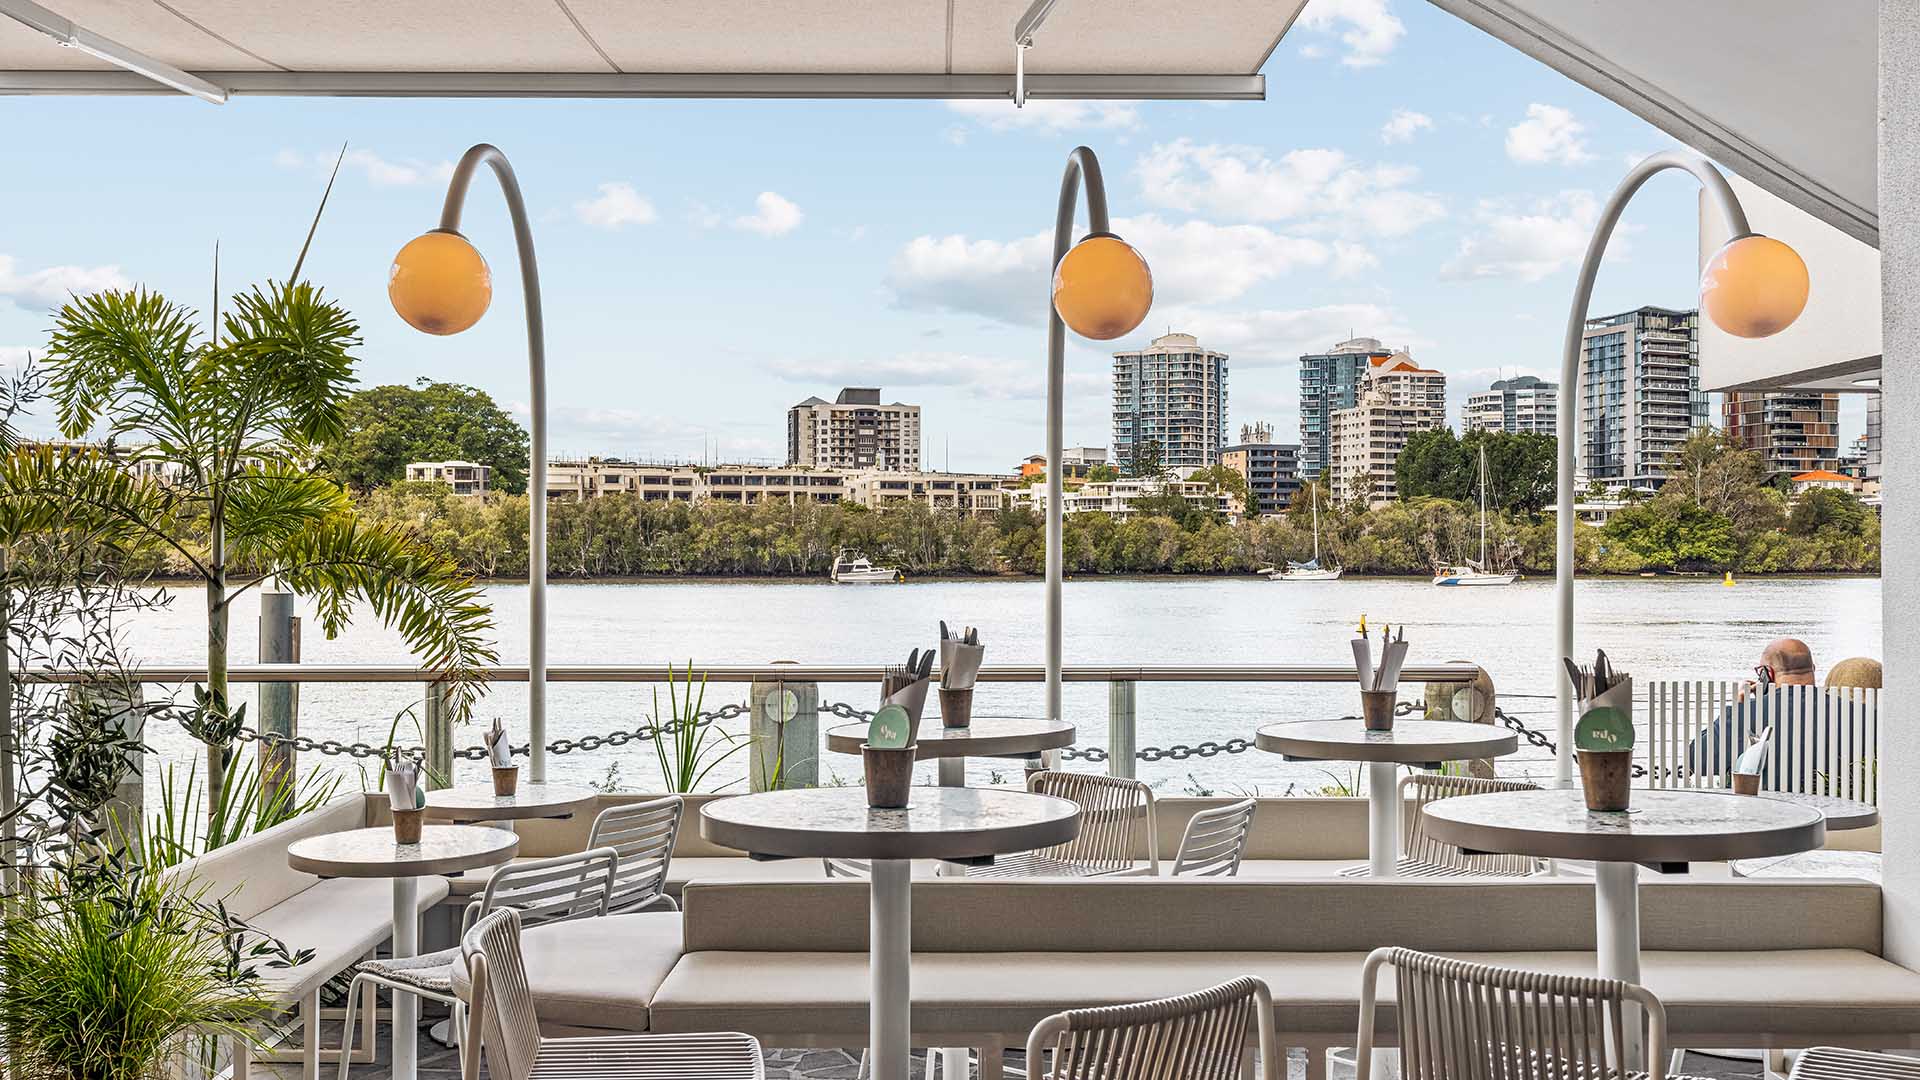 Eagle Street's Riverfront Greek Eatery Opa Has Given Its Scenic Bar a Santorini-Inspired Makeover